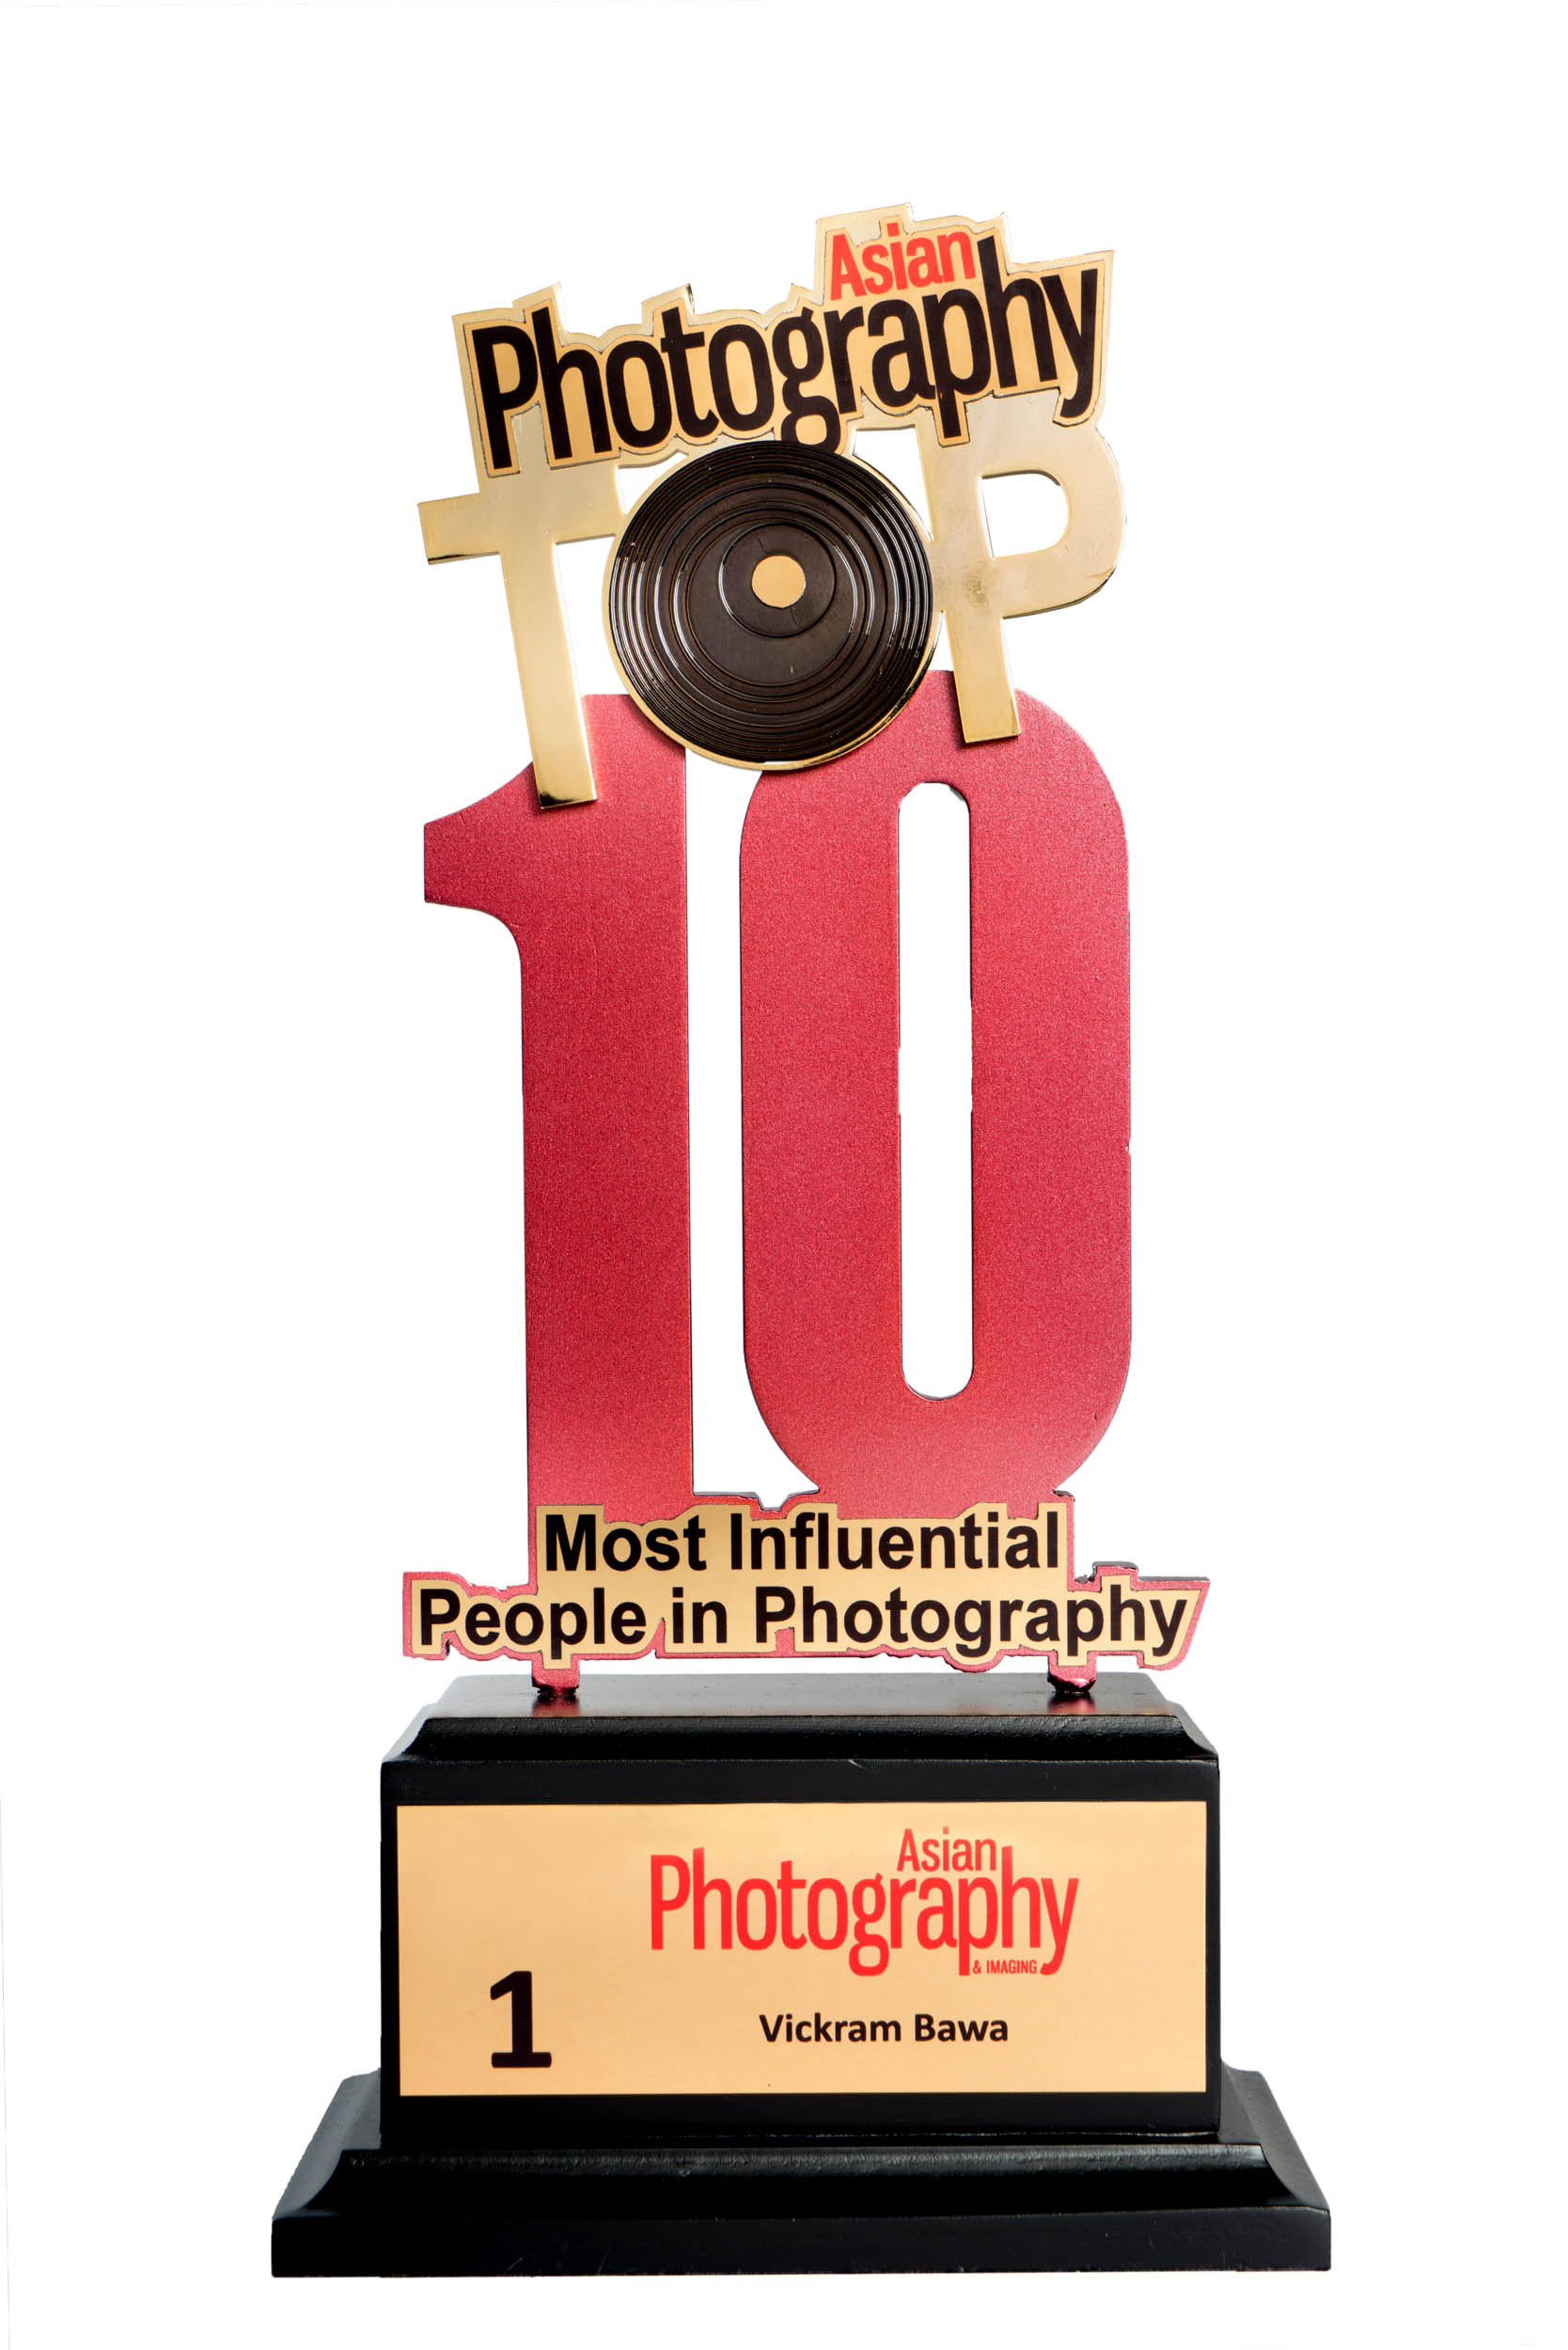 Best Award Winner Photographer in India, Vikram Bawa, Award winnner in Asian Photography for Top 10 Most Influential People in Photography, Legendery Photographer, Best Fashion Photographer Vikram Bawa, Mumbai, India